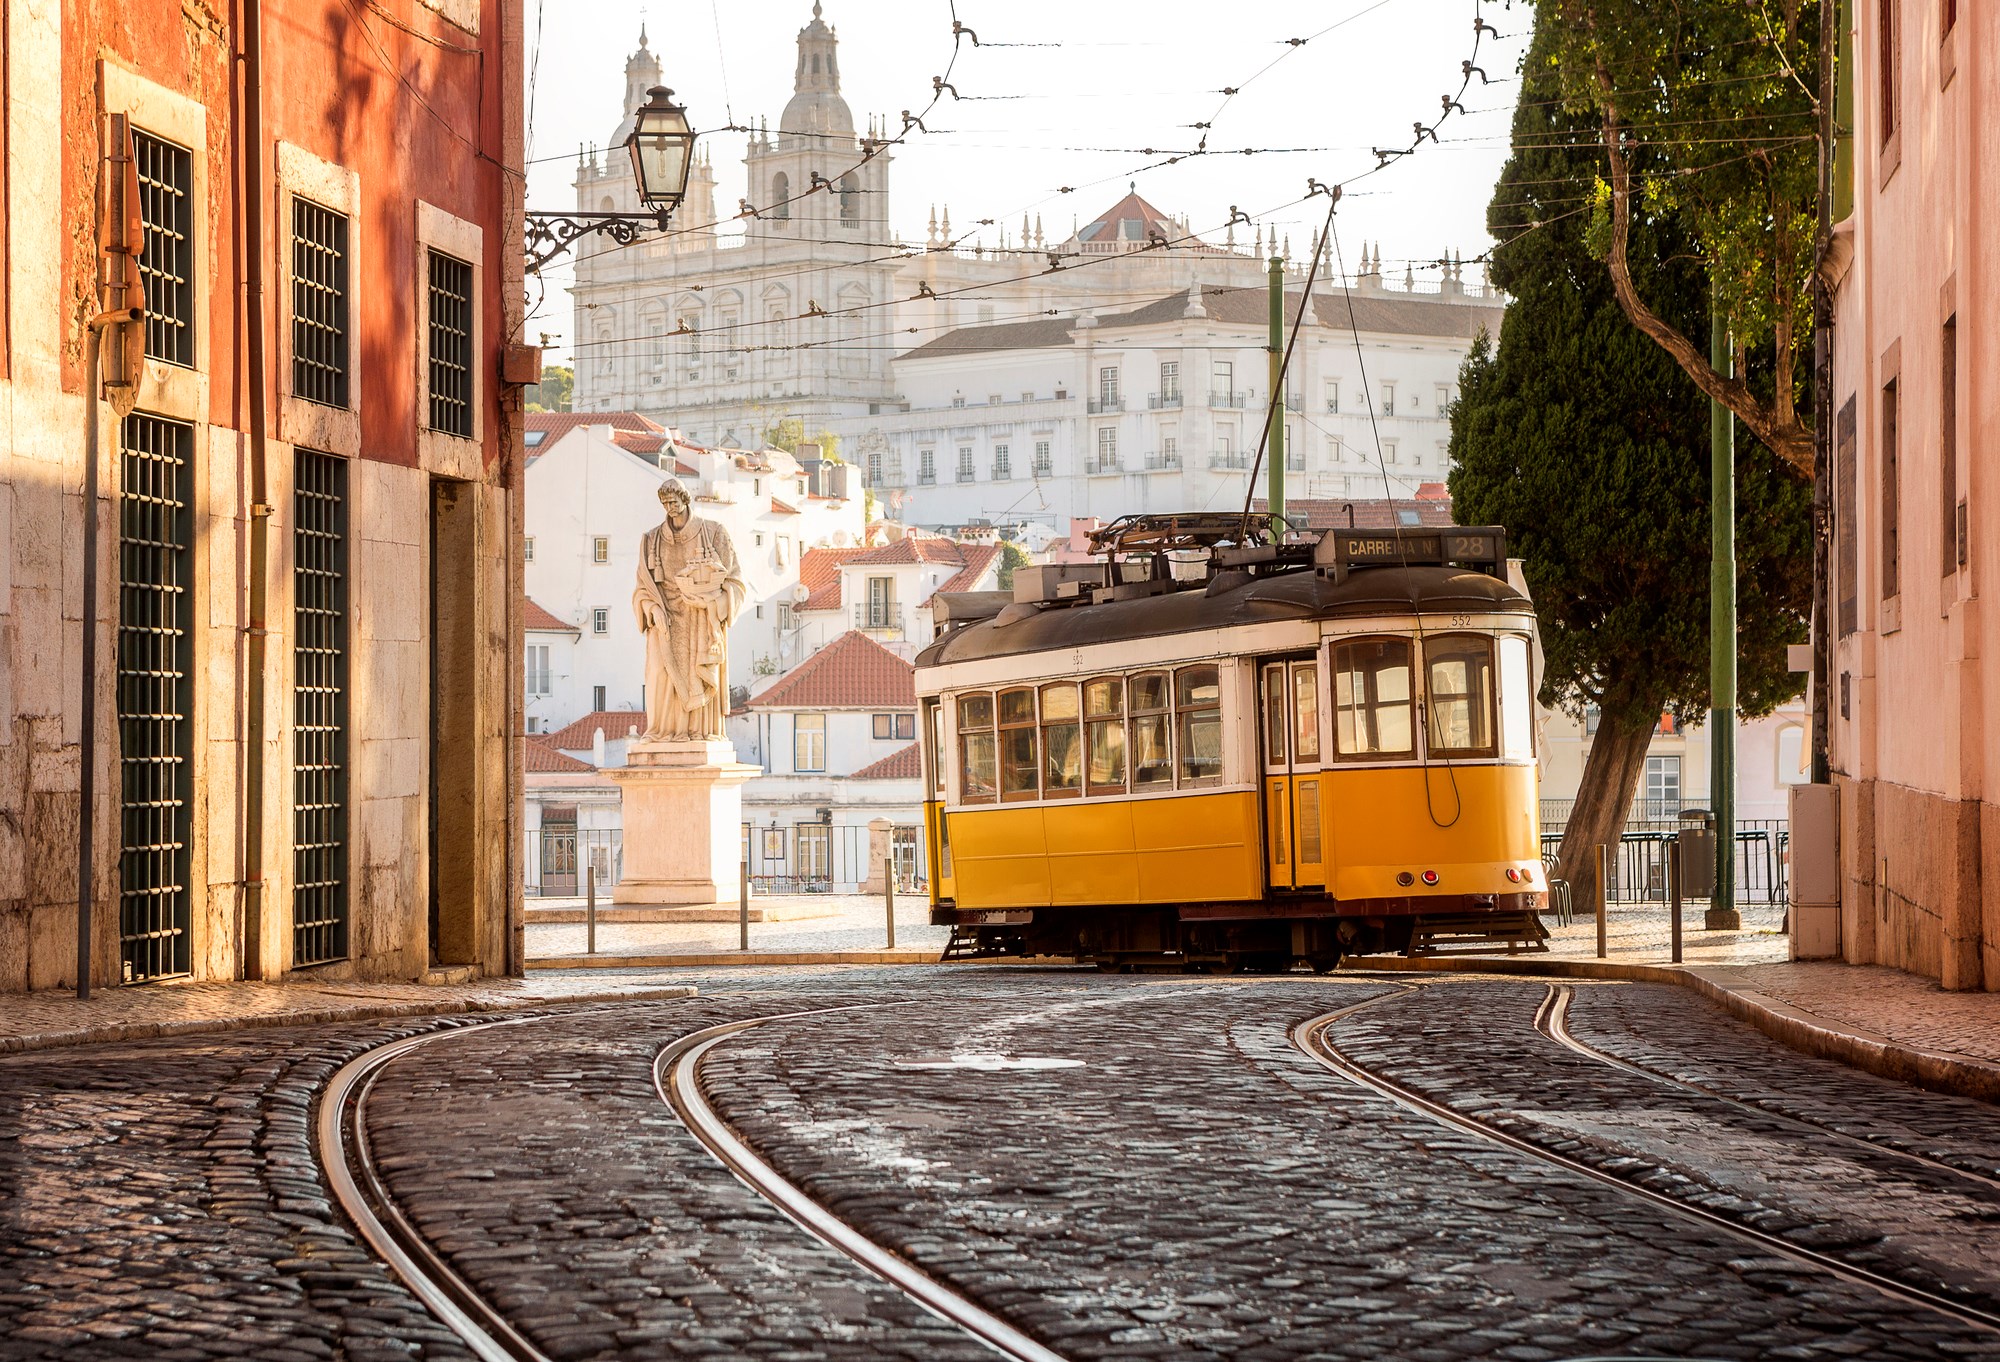 Iconic tram in the old town of Lisbon, Portugal